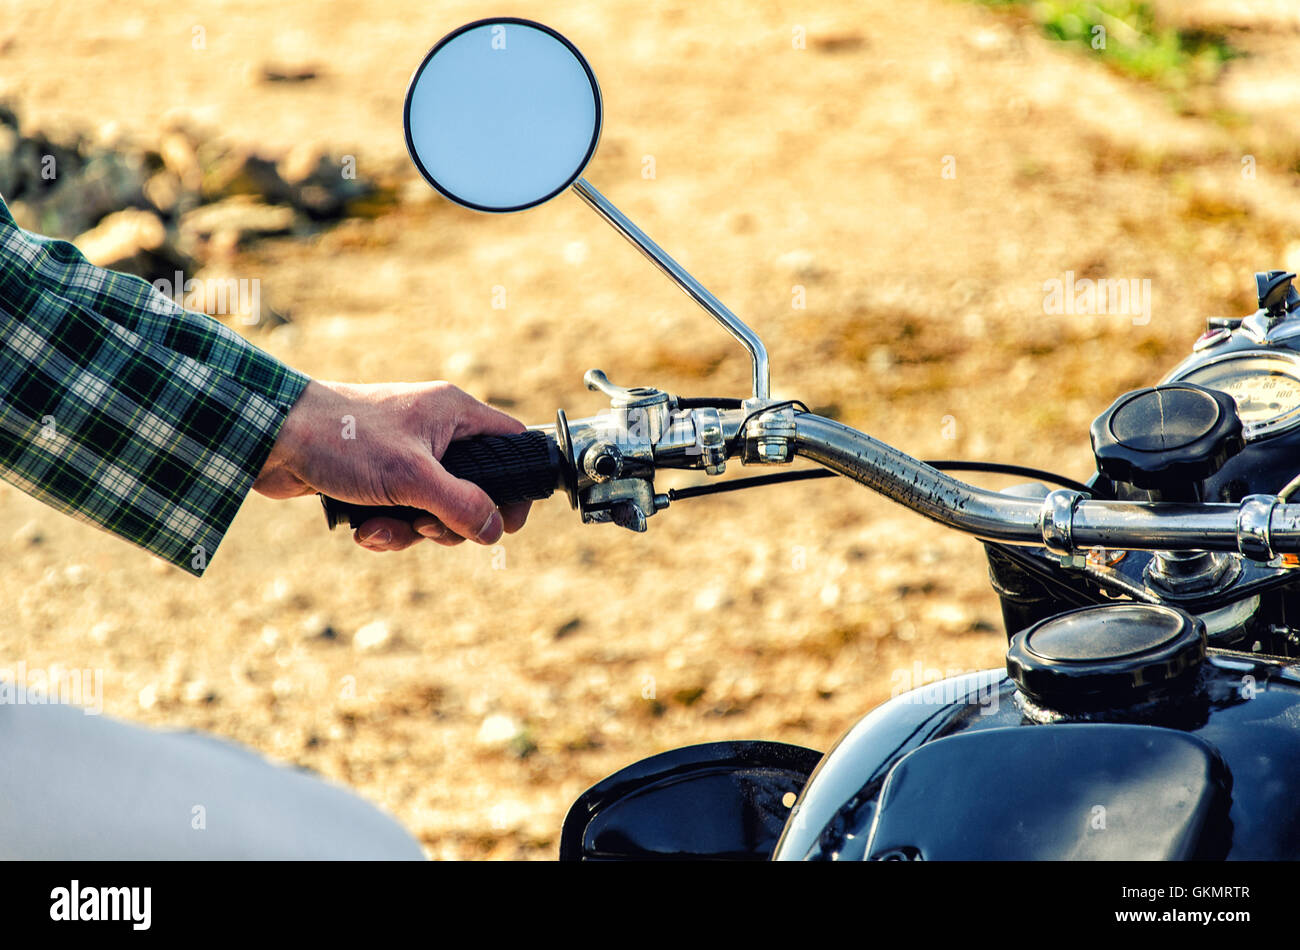 Man's hand rests on the steering wheel motorcycle Stock Photo